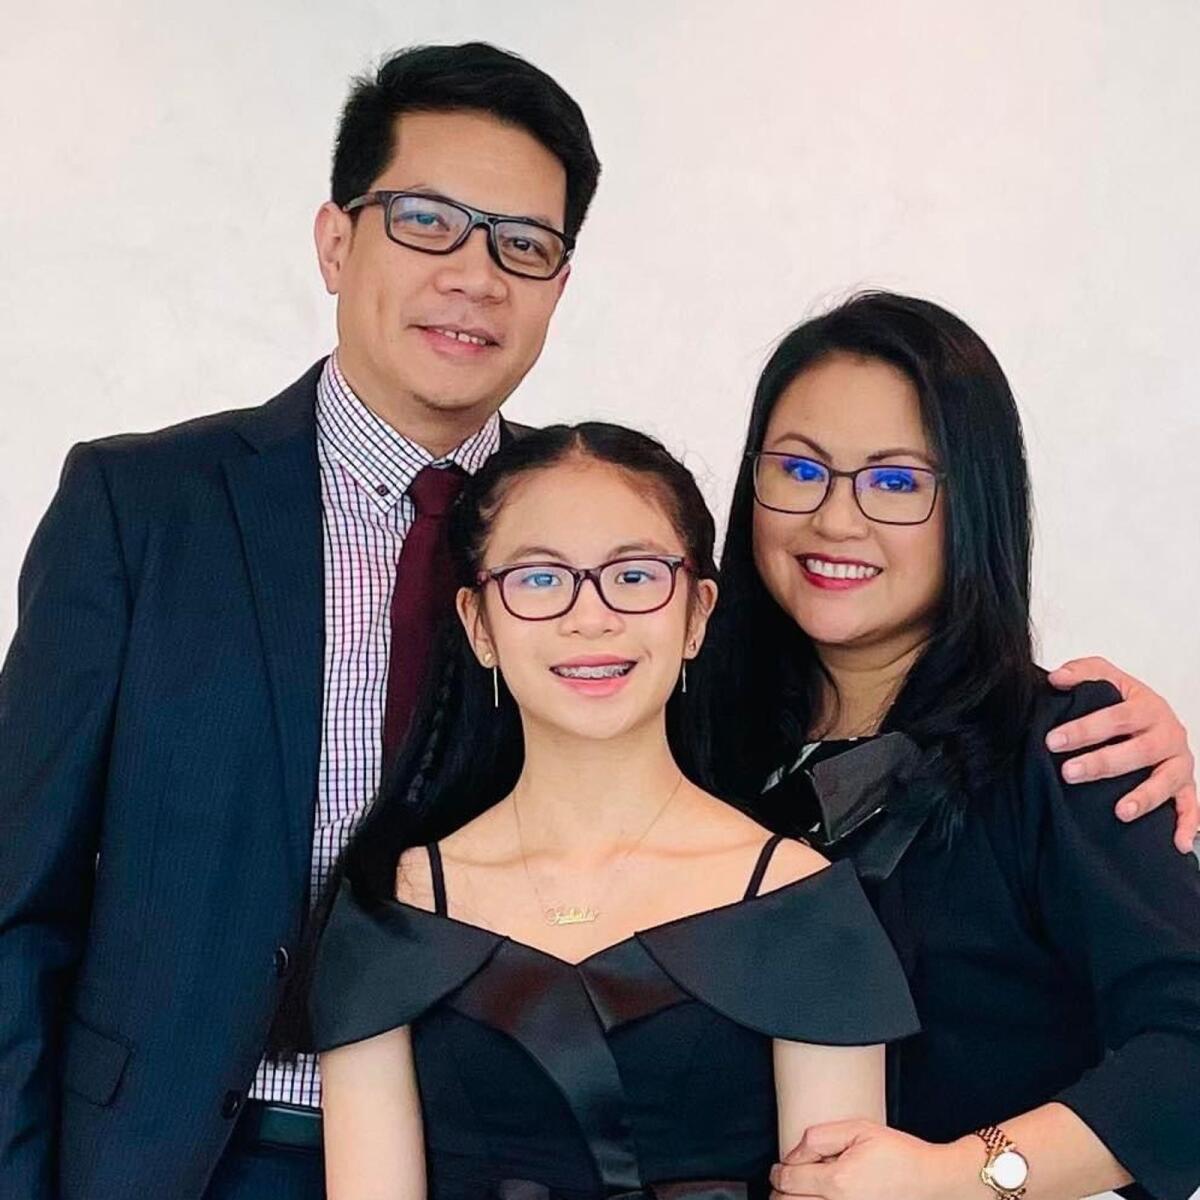 Filipino expat Ben Lebig with his wife and daughter. Photo: Supplied